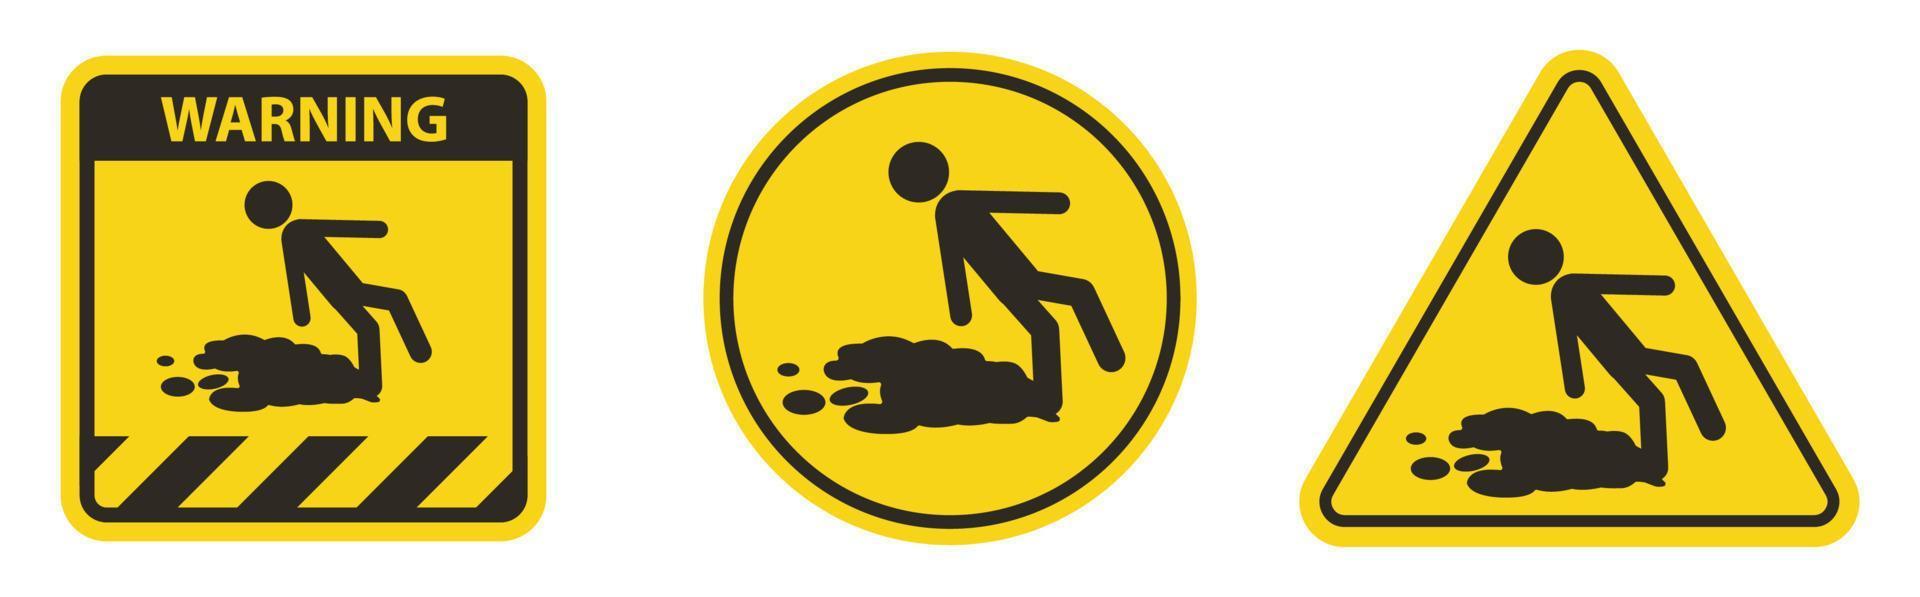 Caution Beware Slippery Surface Symbol Isolate On White Background vector